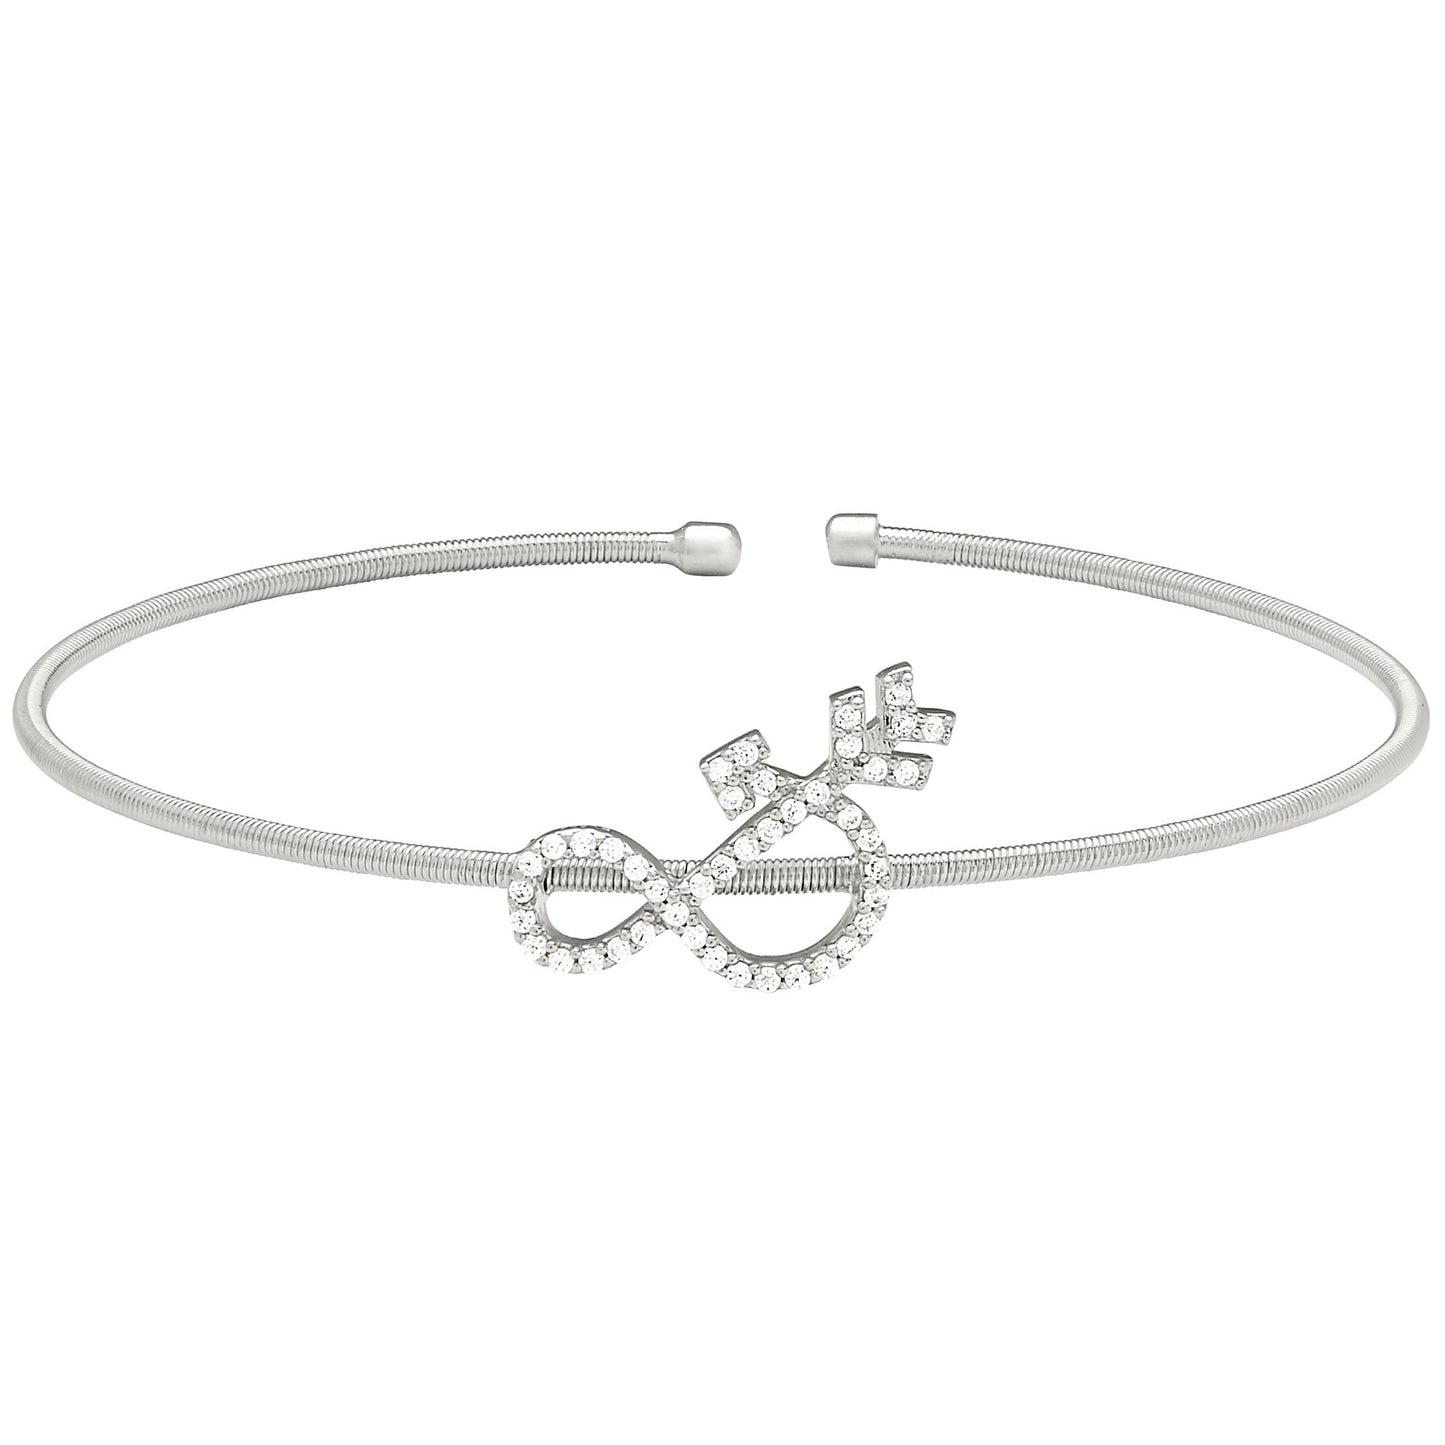 A ampersand flexible cable bracelet with simulated diamonds displayed on a neutral white background.